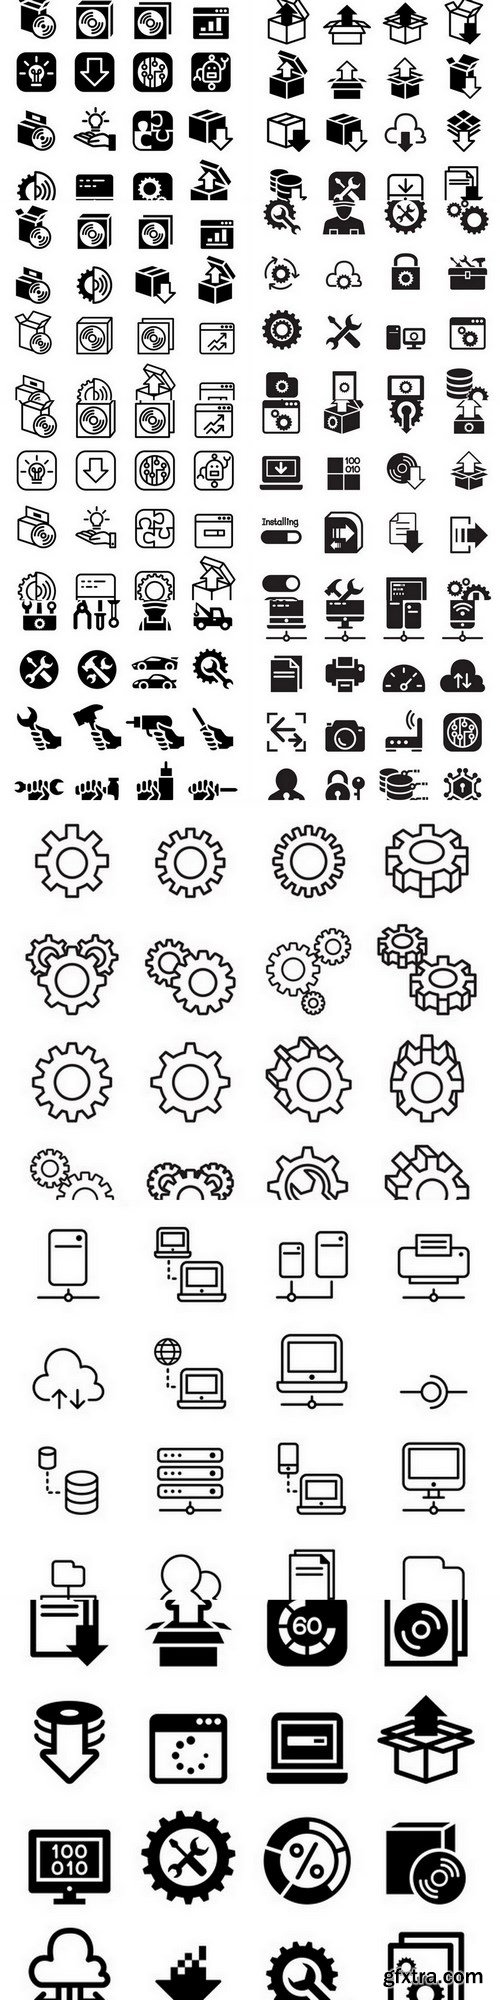 Software icons - 11 EPS Vector Stock